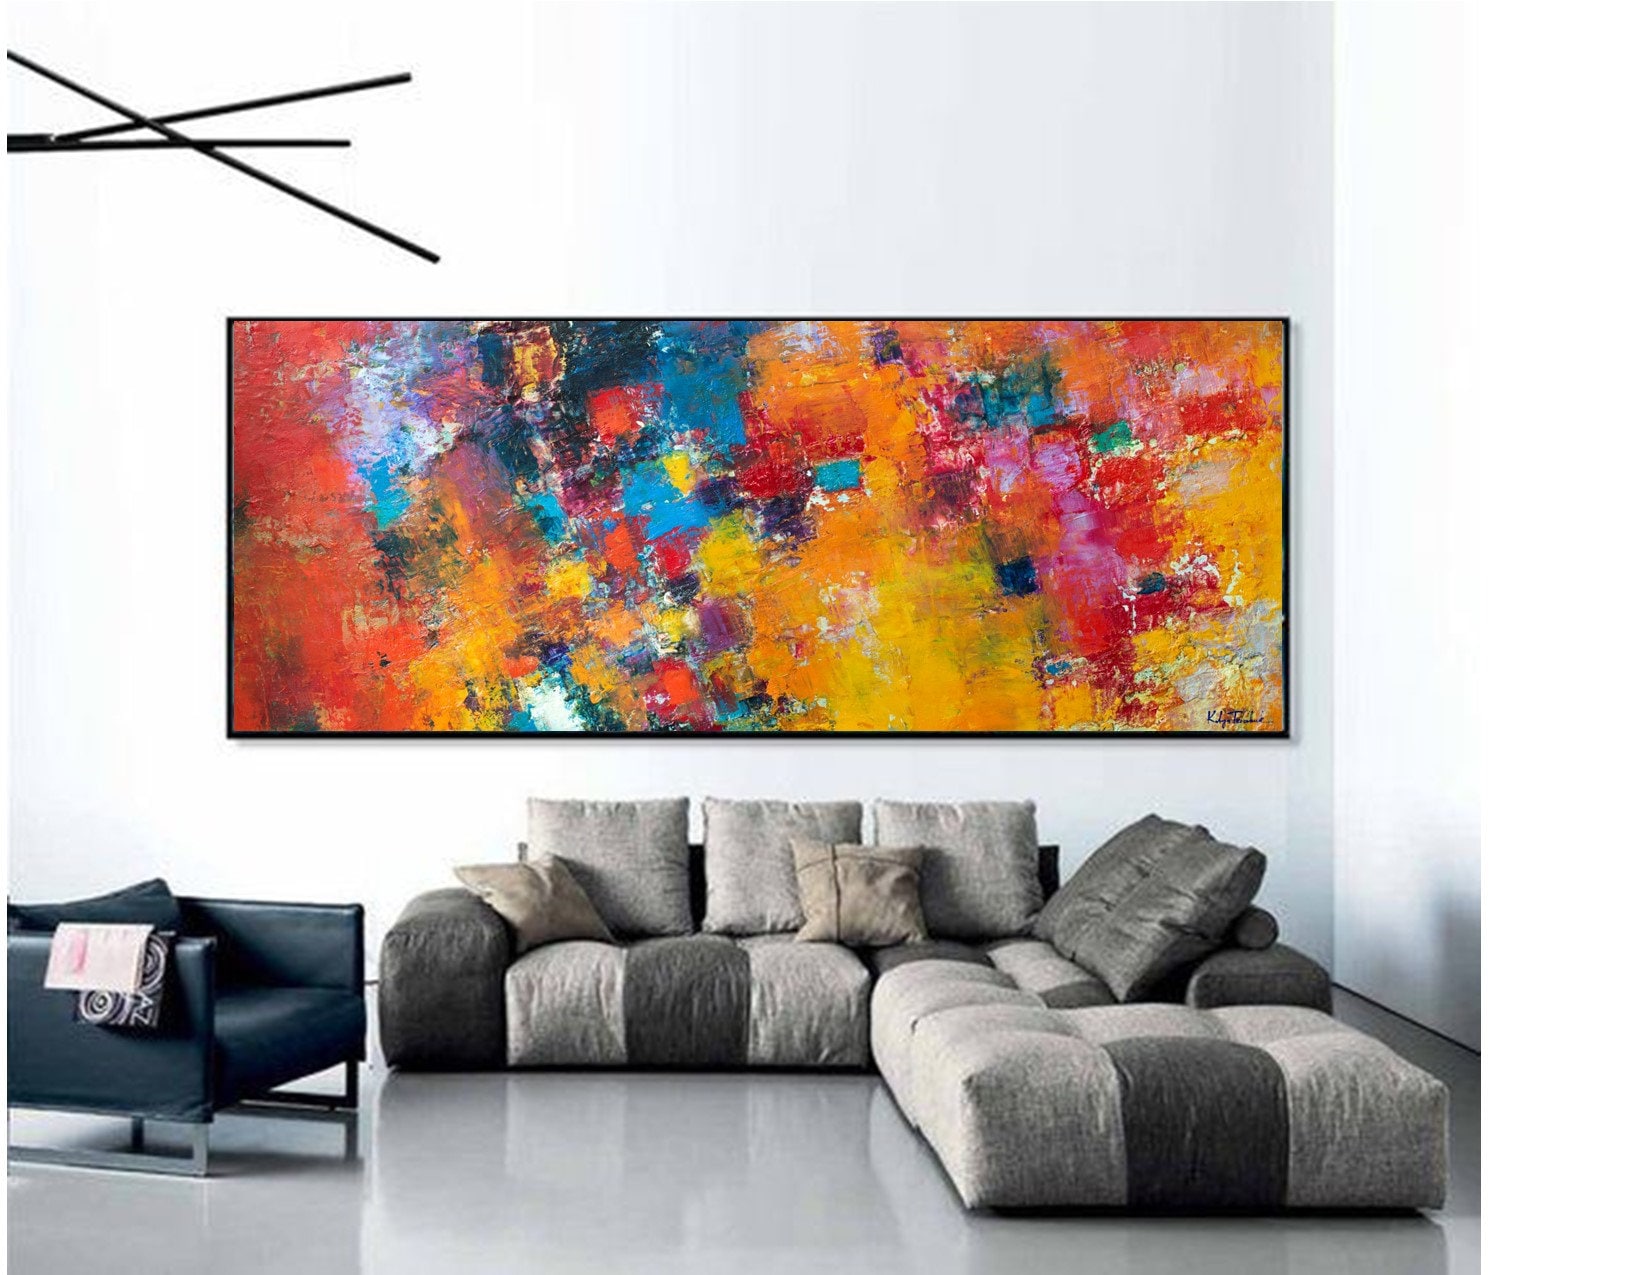 Abstract Figurative Painting,Colorful Wall Art Canvas,Figure Wall Art,Oversized Art Abstract,Huge Wall Art,Orange Painting,Purple Painting